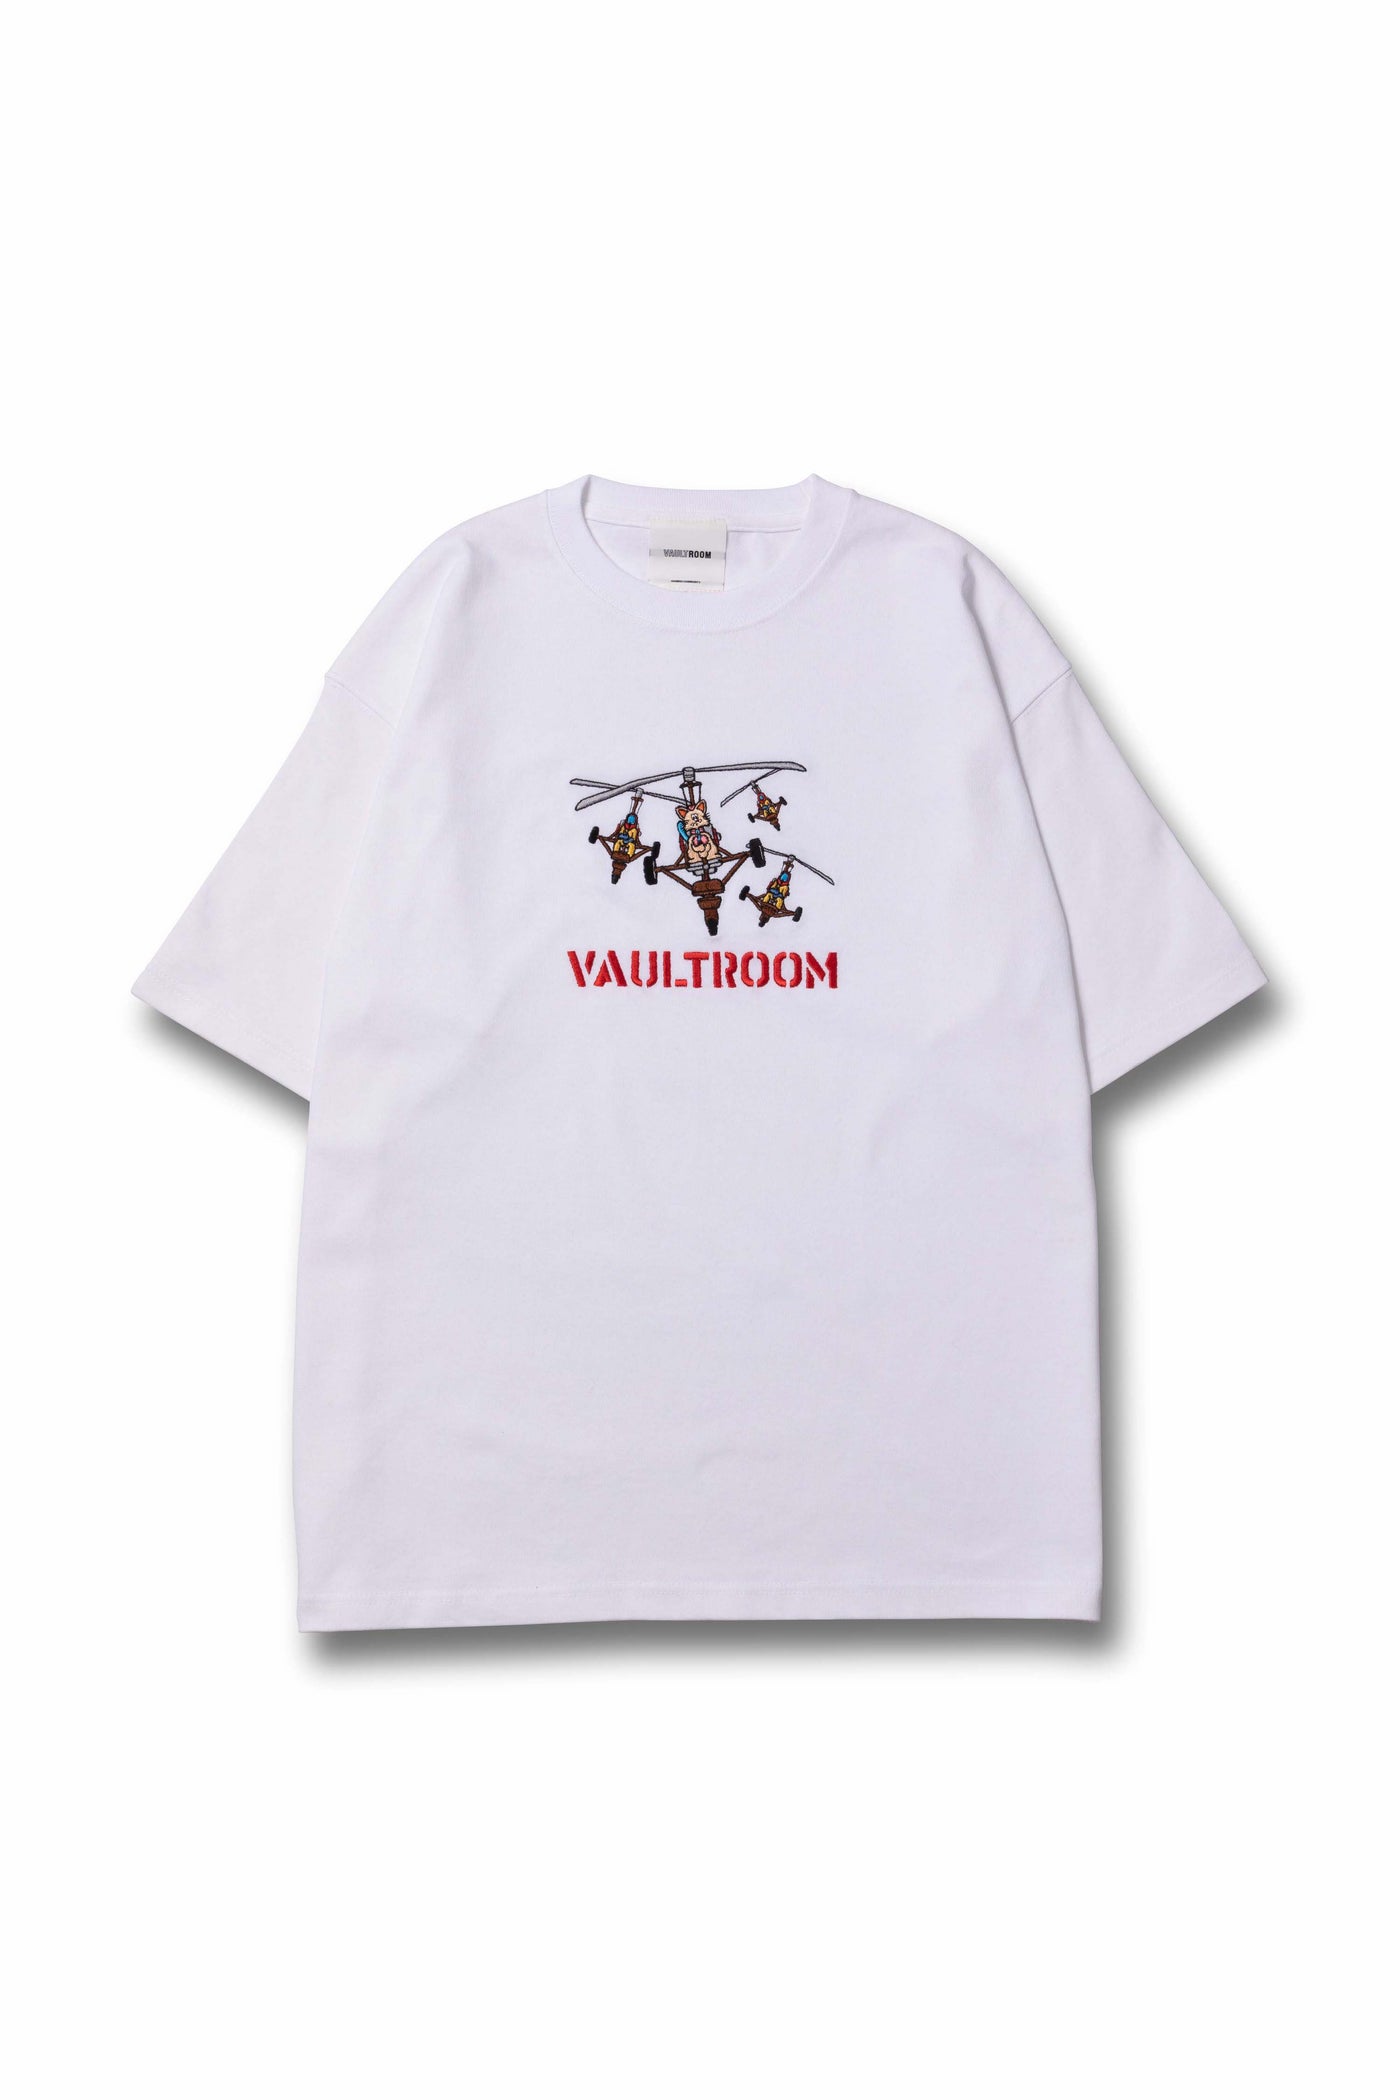 vaultroom PAY TO WIN TEE Tシャツ ボルトルーム - トップス